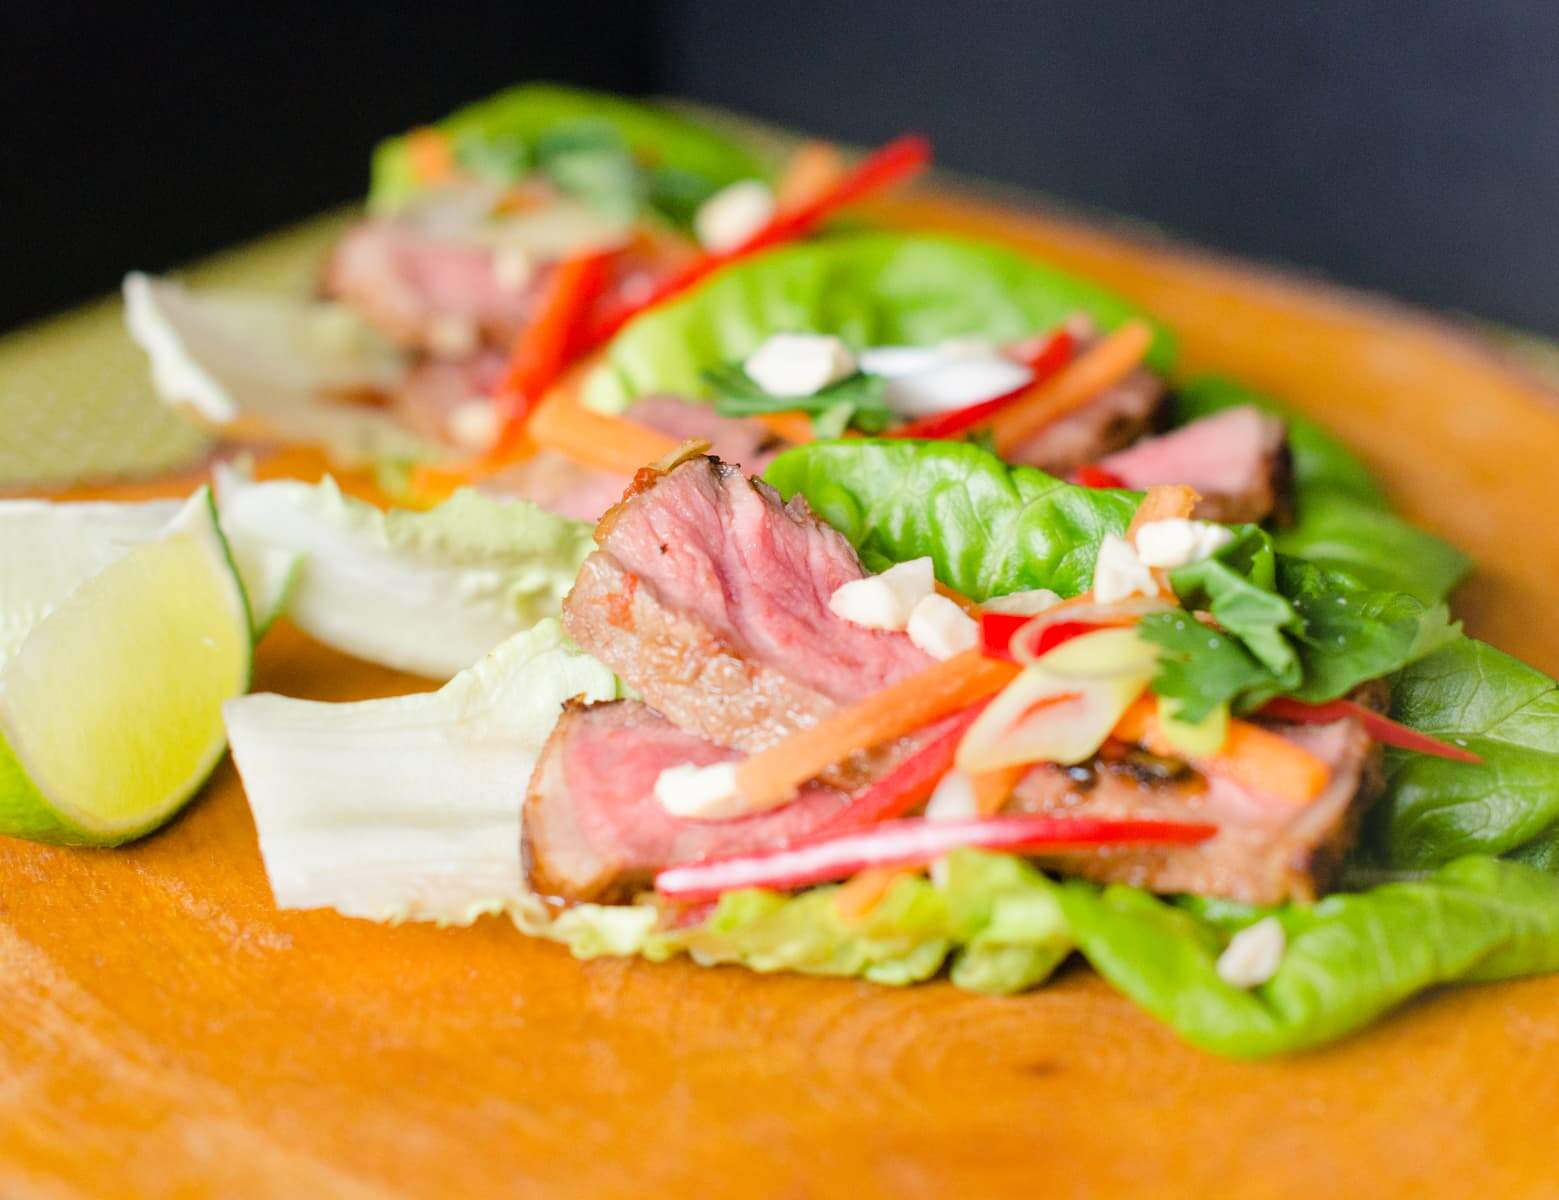 Sirloin steak with lemongrass marinade served on a lettuce leaf with lime and peanuts to garnish